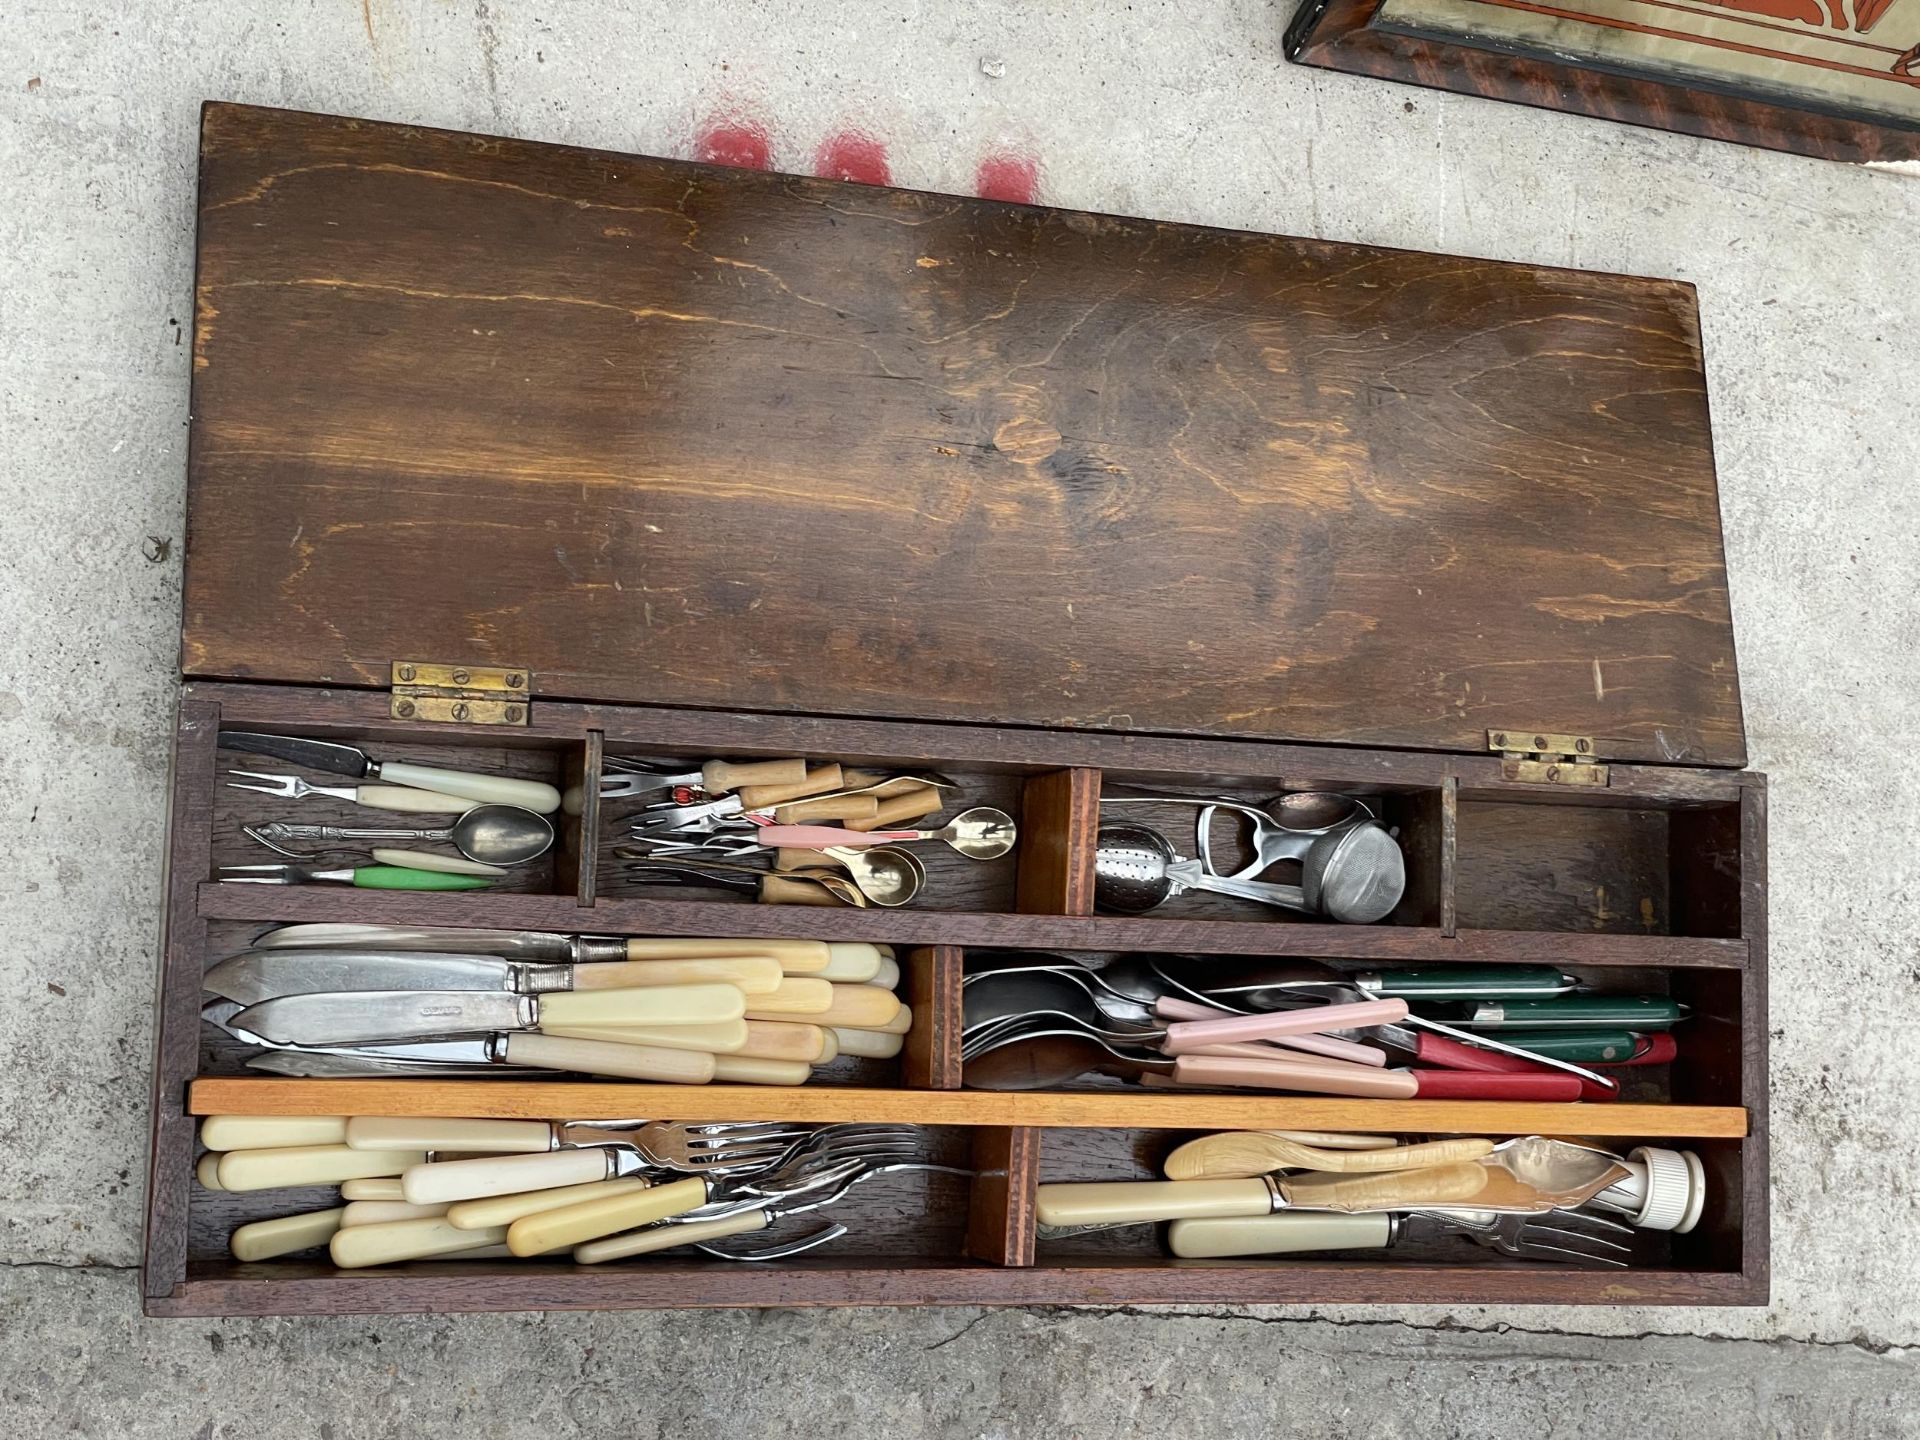 A VINTAGE WOODEN BOX WITH AN ASSORTMENT OF FLATWARE